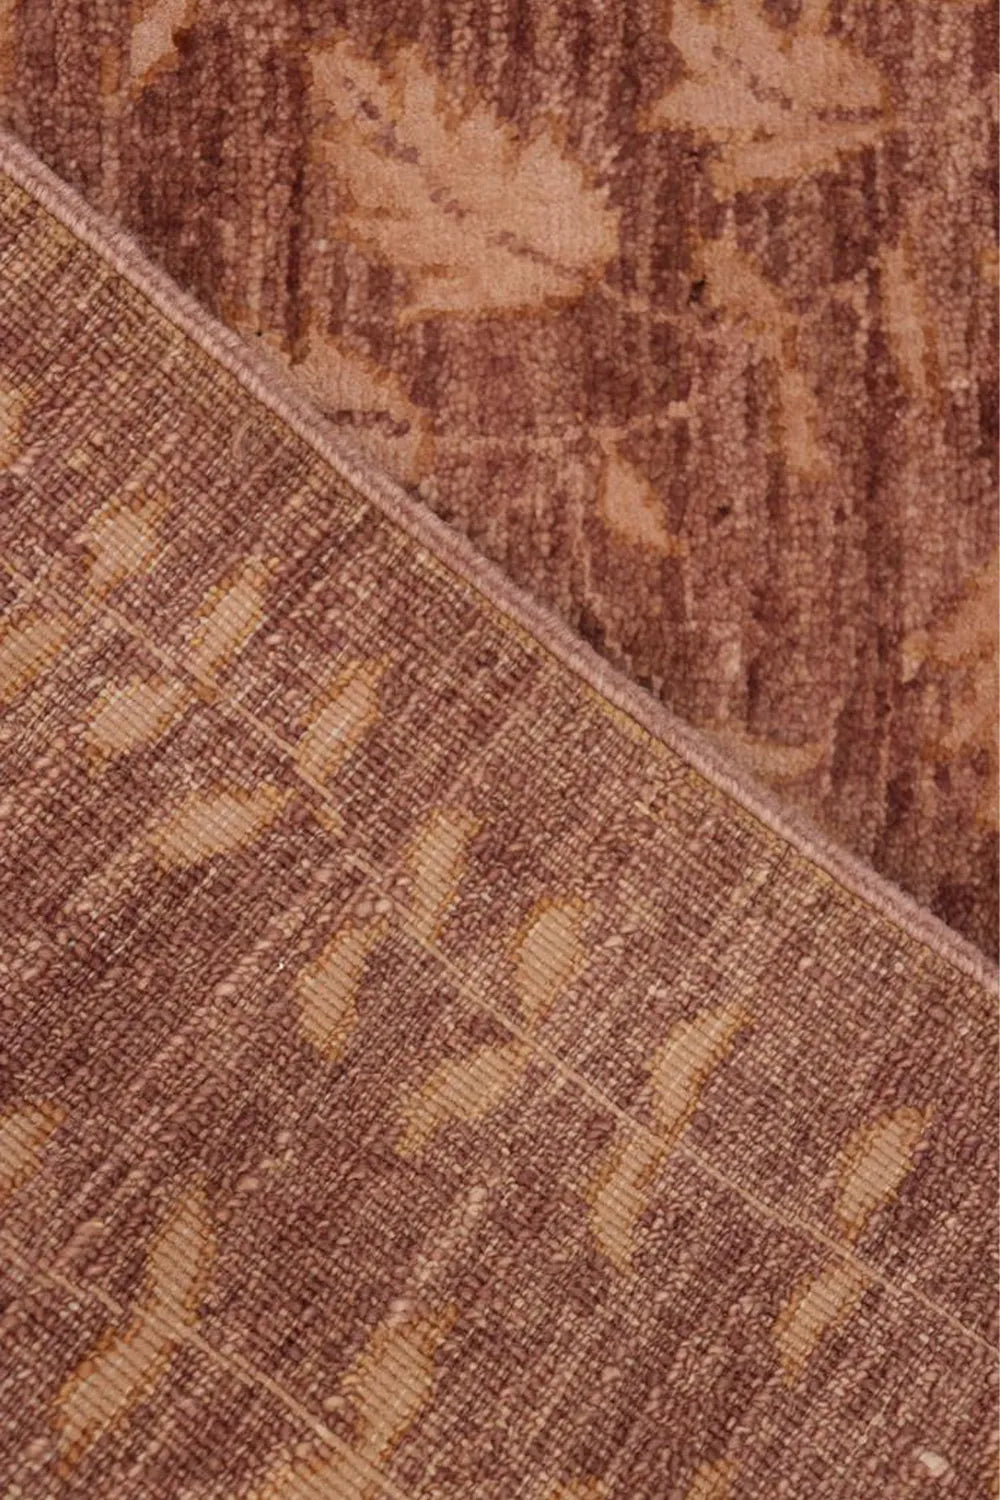 Handcrafted brown area rug made from high-quality New Zealand wool.